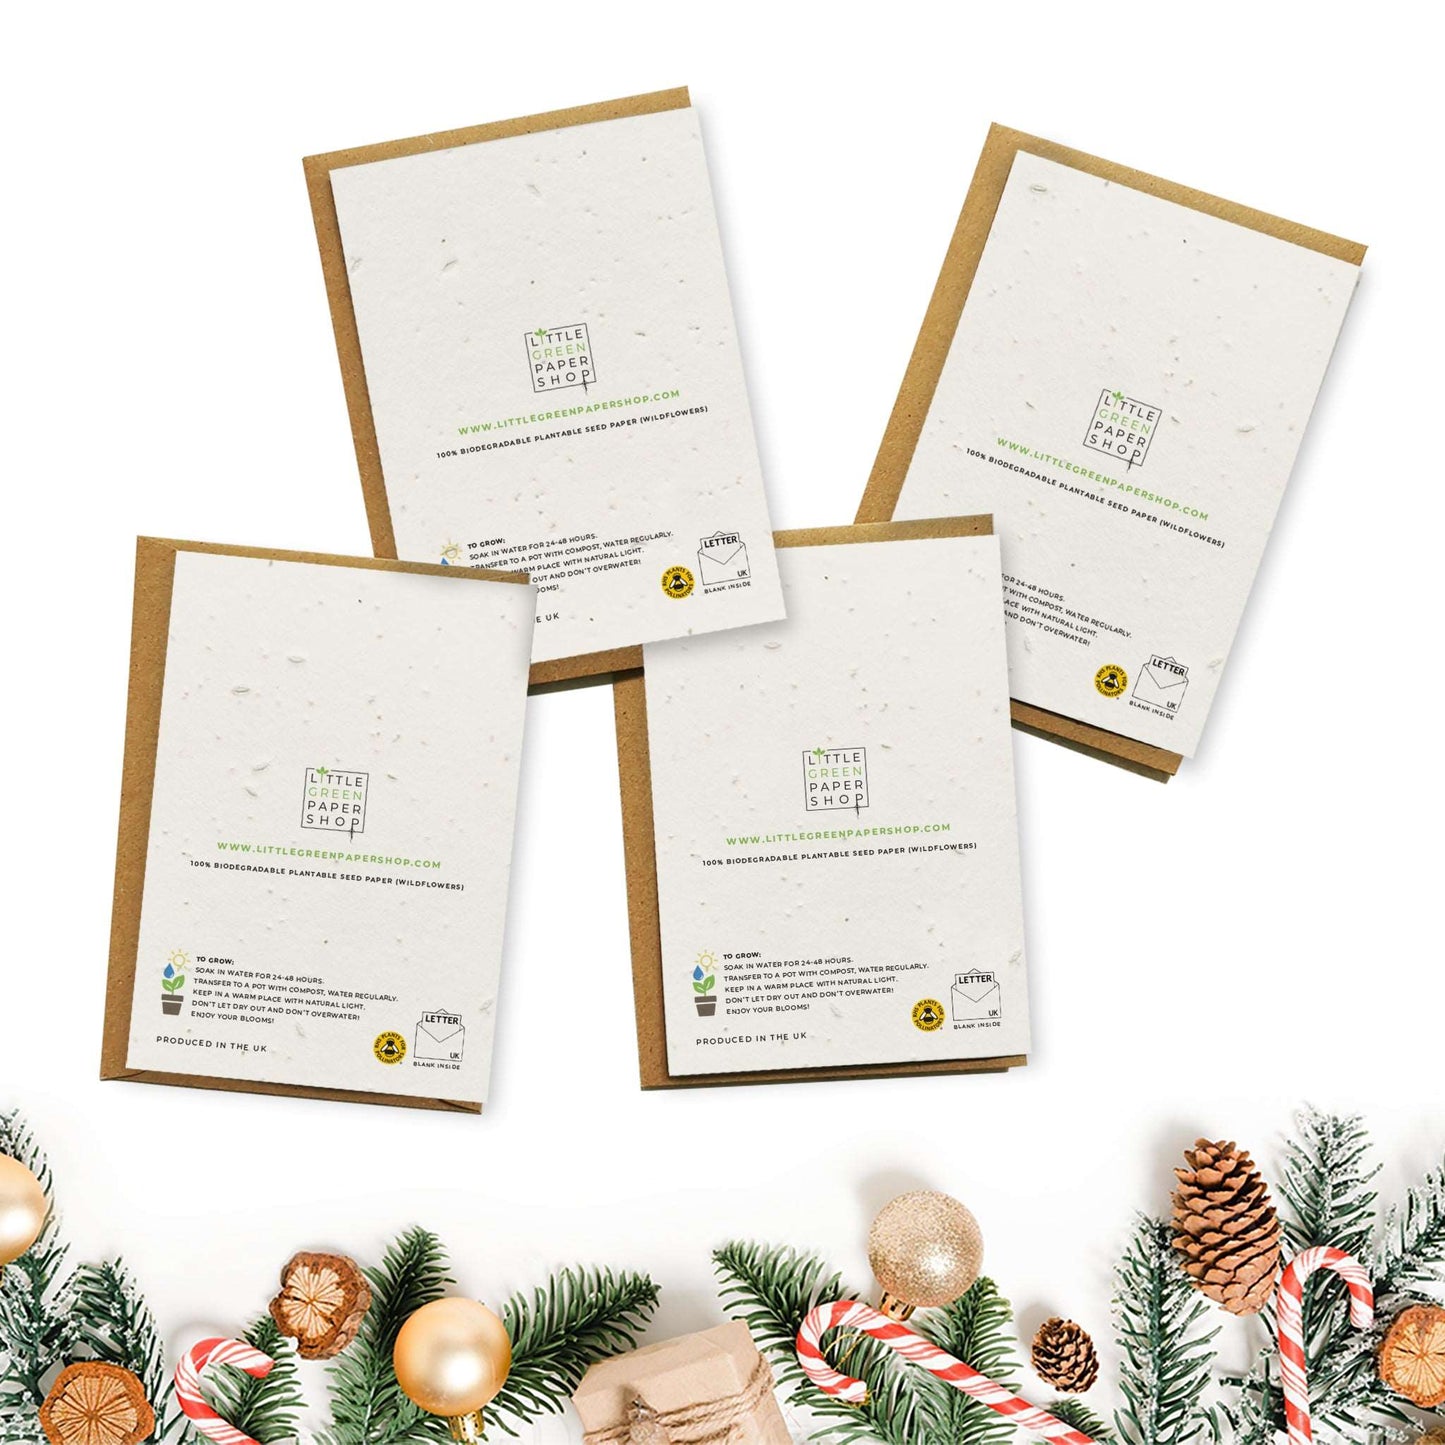 Plantable Seed Paper Christmas Cards 4-Pack - Ho Ho Ho Greeting Card Little Green Paper Shop